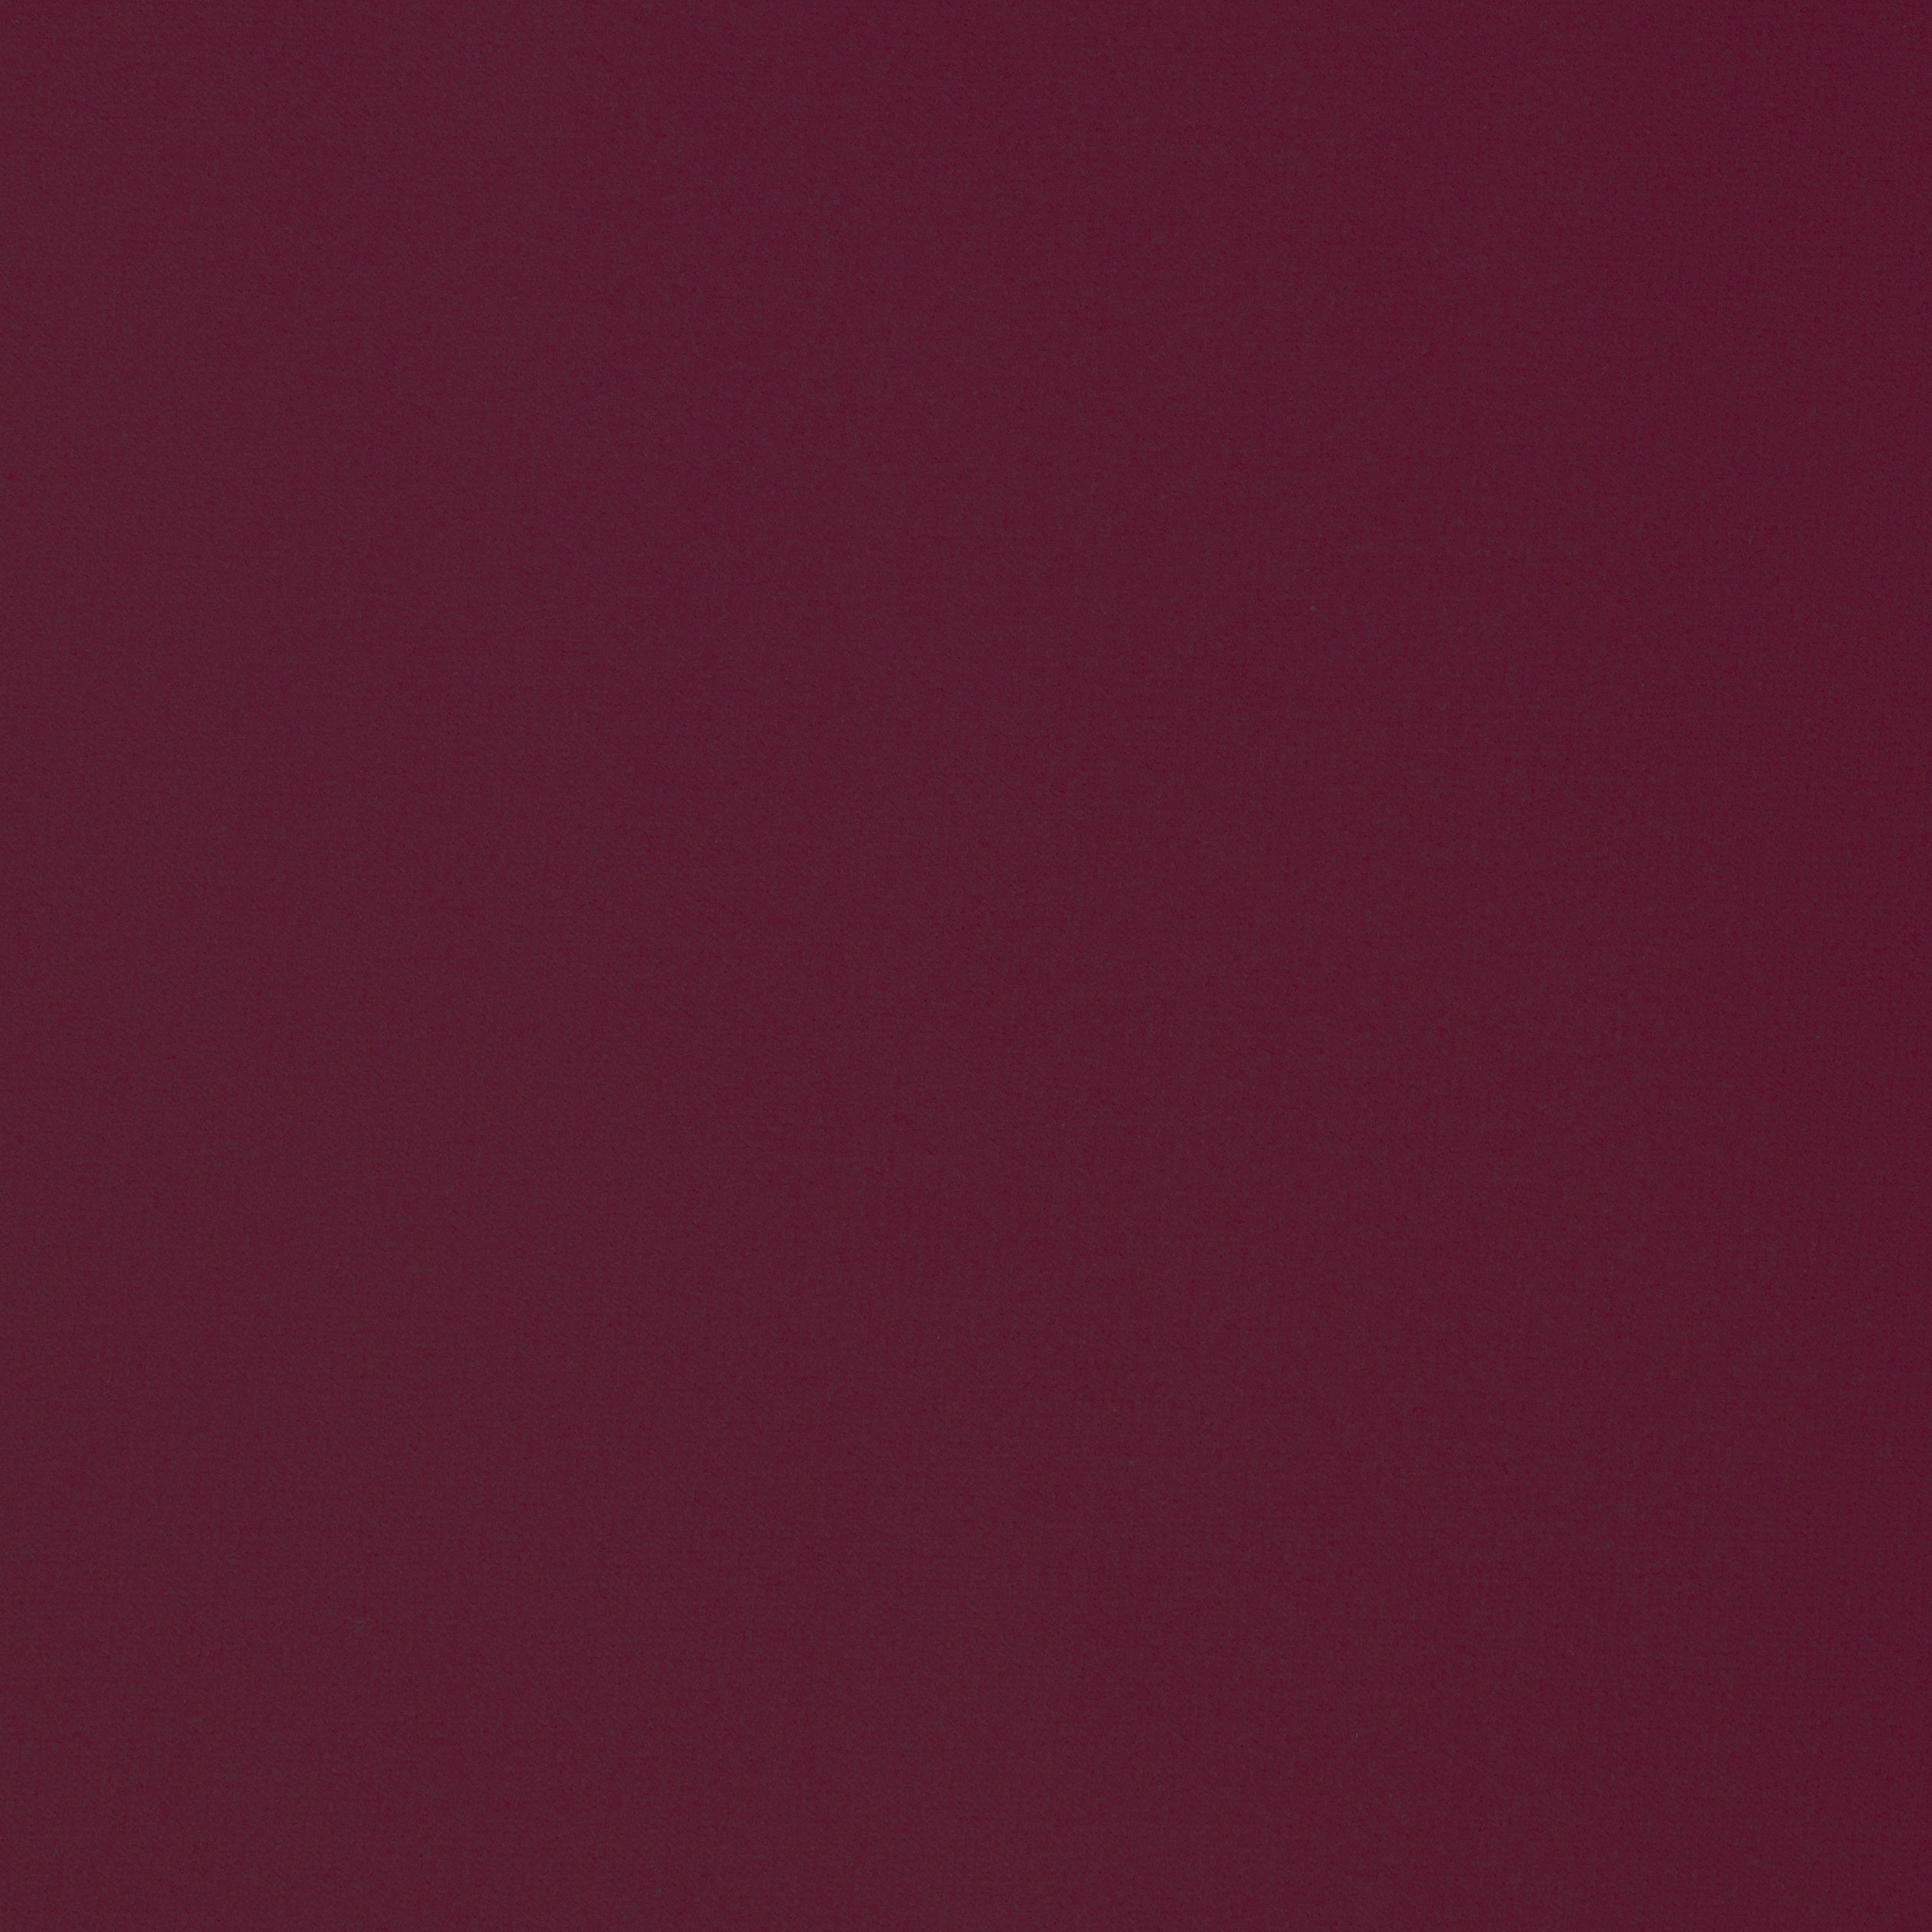 Lyra Velvet fabric in merlot color - pattern number W8900 - by Thibaut in the Lyra Velvets collection